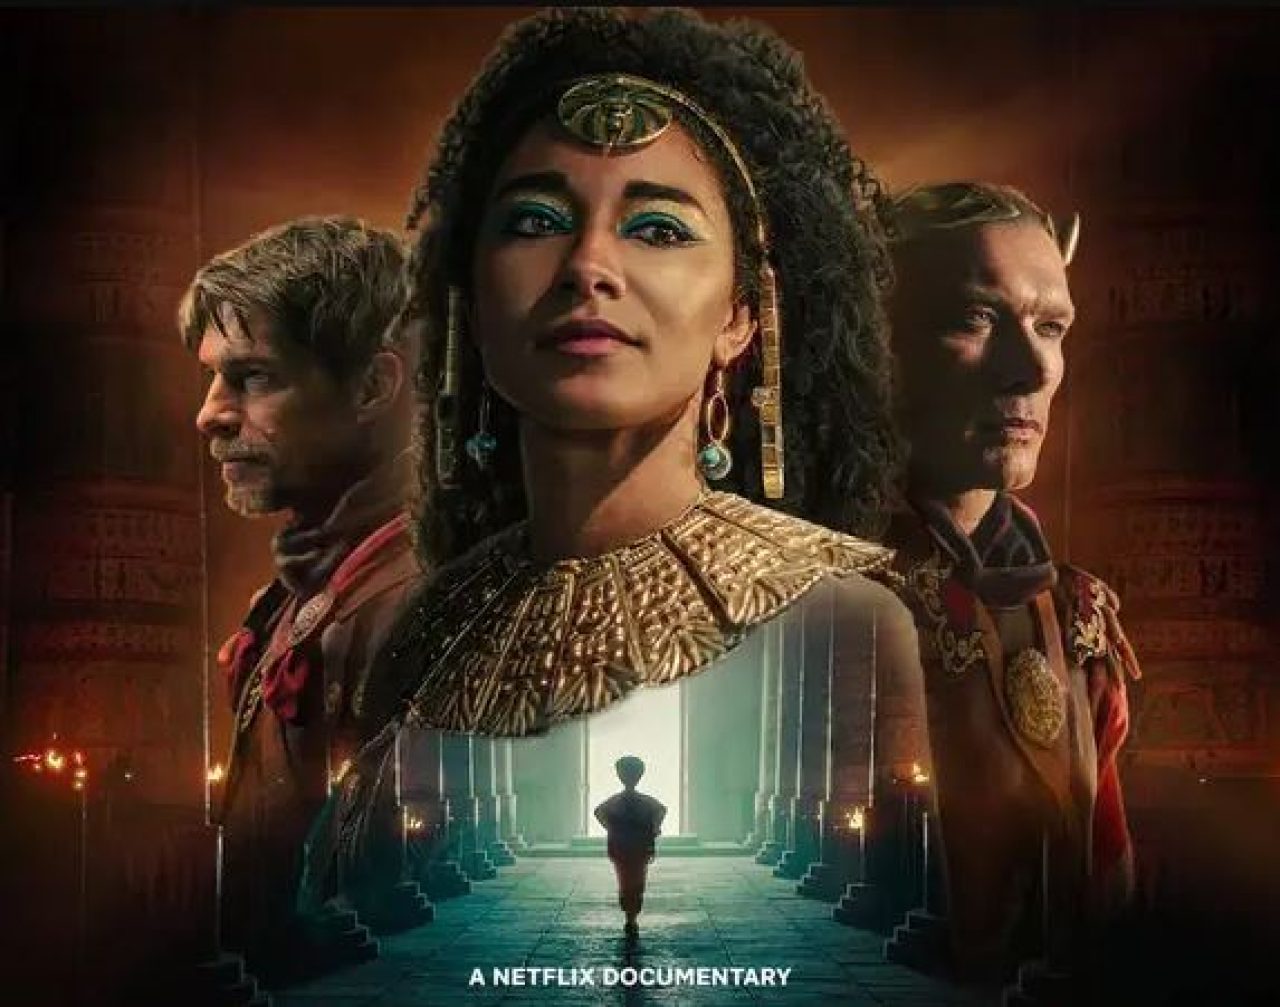 Egypt dismisses Netflix “Queen Cleopatra,” as “blatant historical fallacy”. Afro News Wire